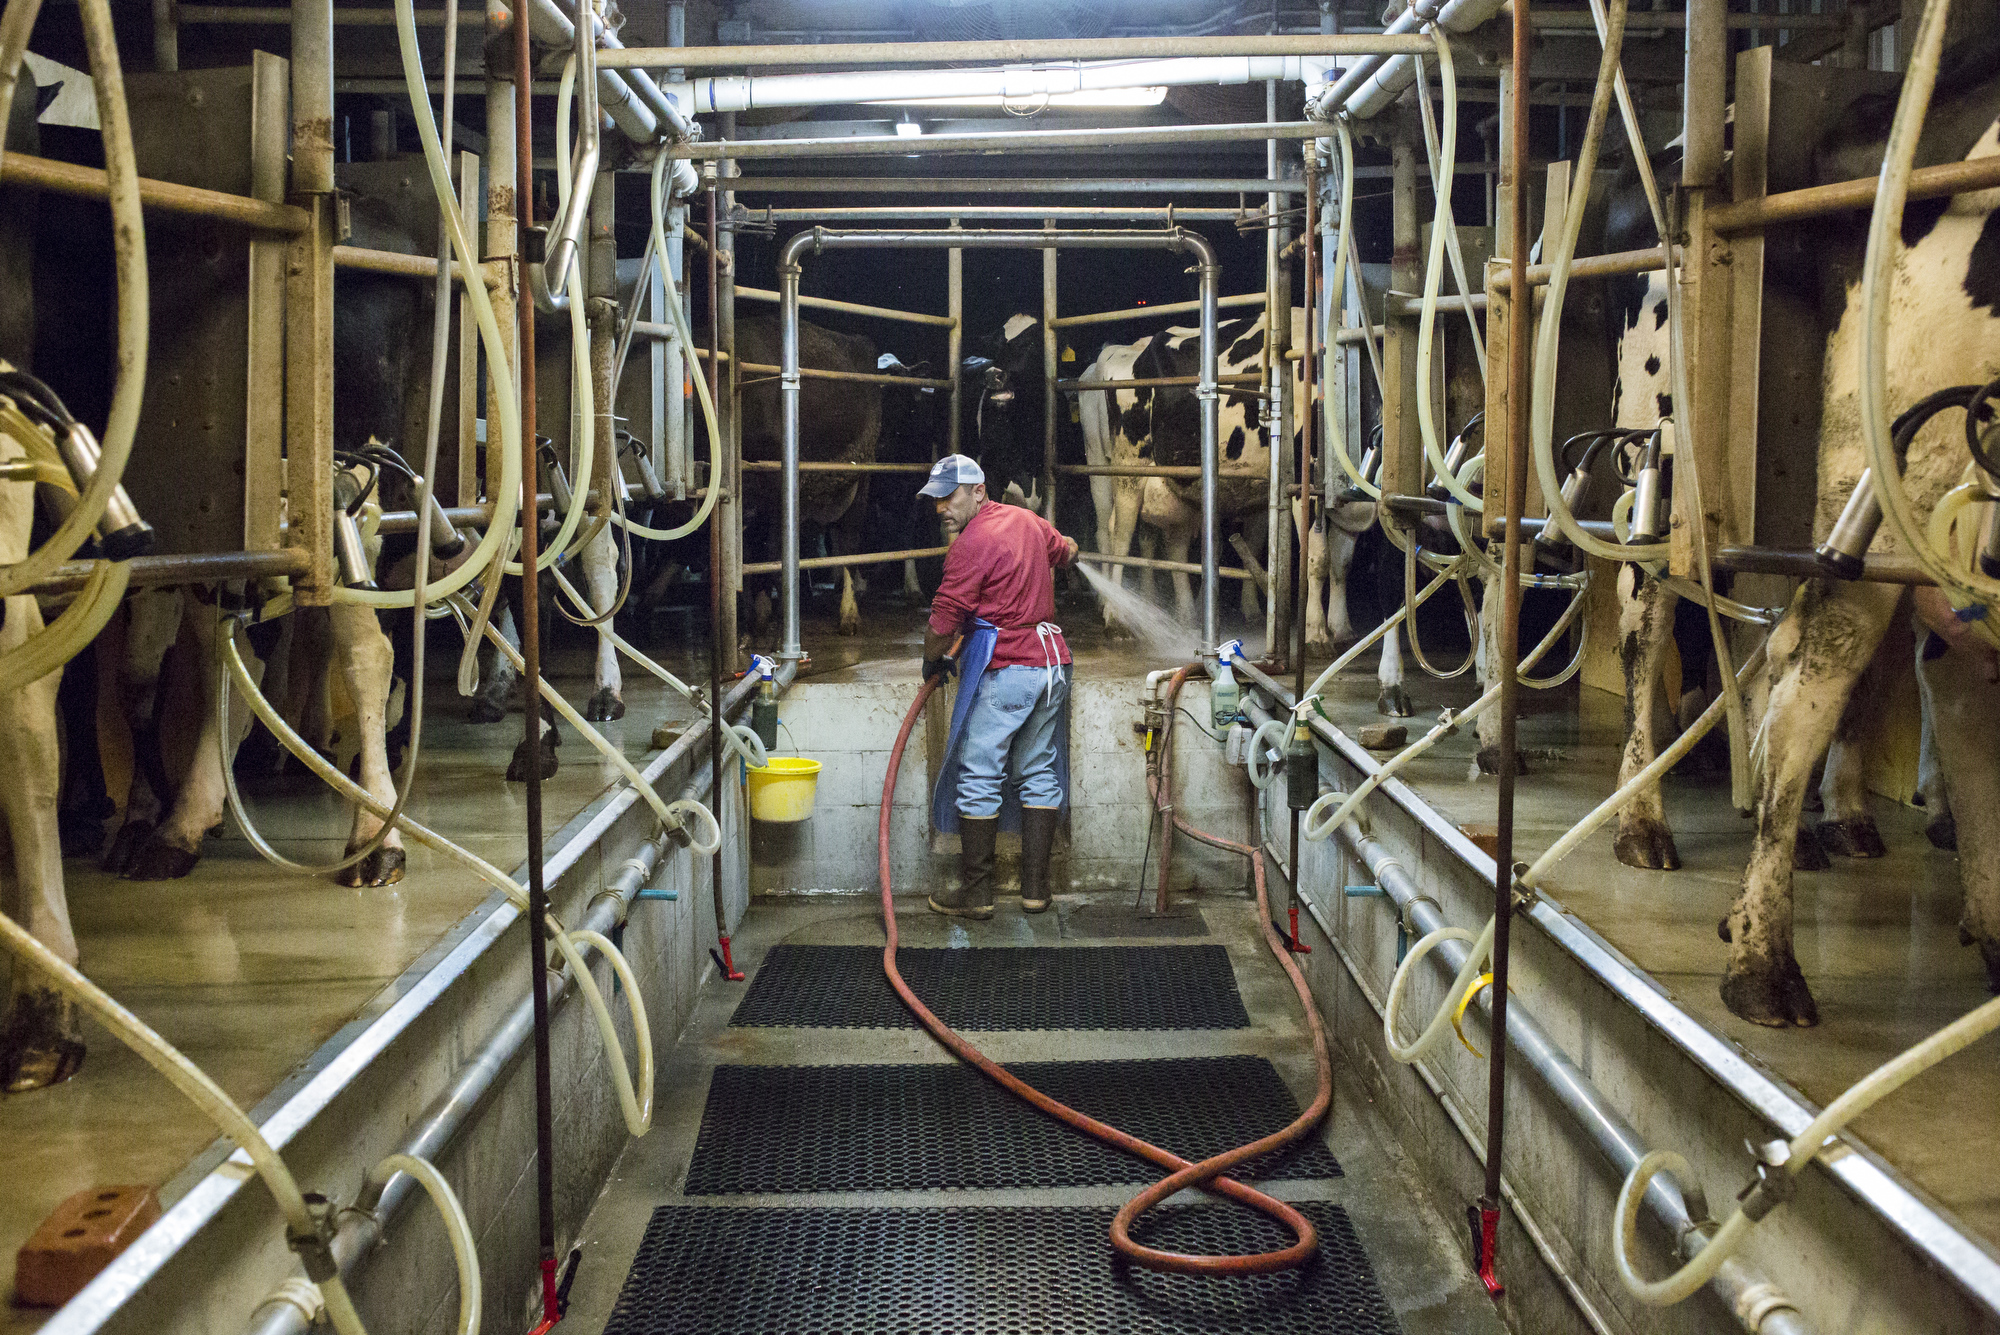  Jeff Busciglio looks back into the milking parlor during an overnight milking at Tower Dairy, on March 7, 2017, in Tampa, Florida. Dairy cows have to be milked twice a day, 12 hours apart. Depending on other tasks, like mixing feed, Jeff would arriv